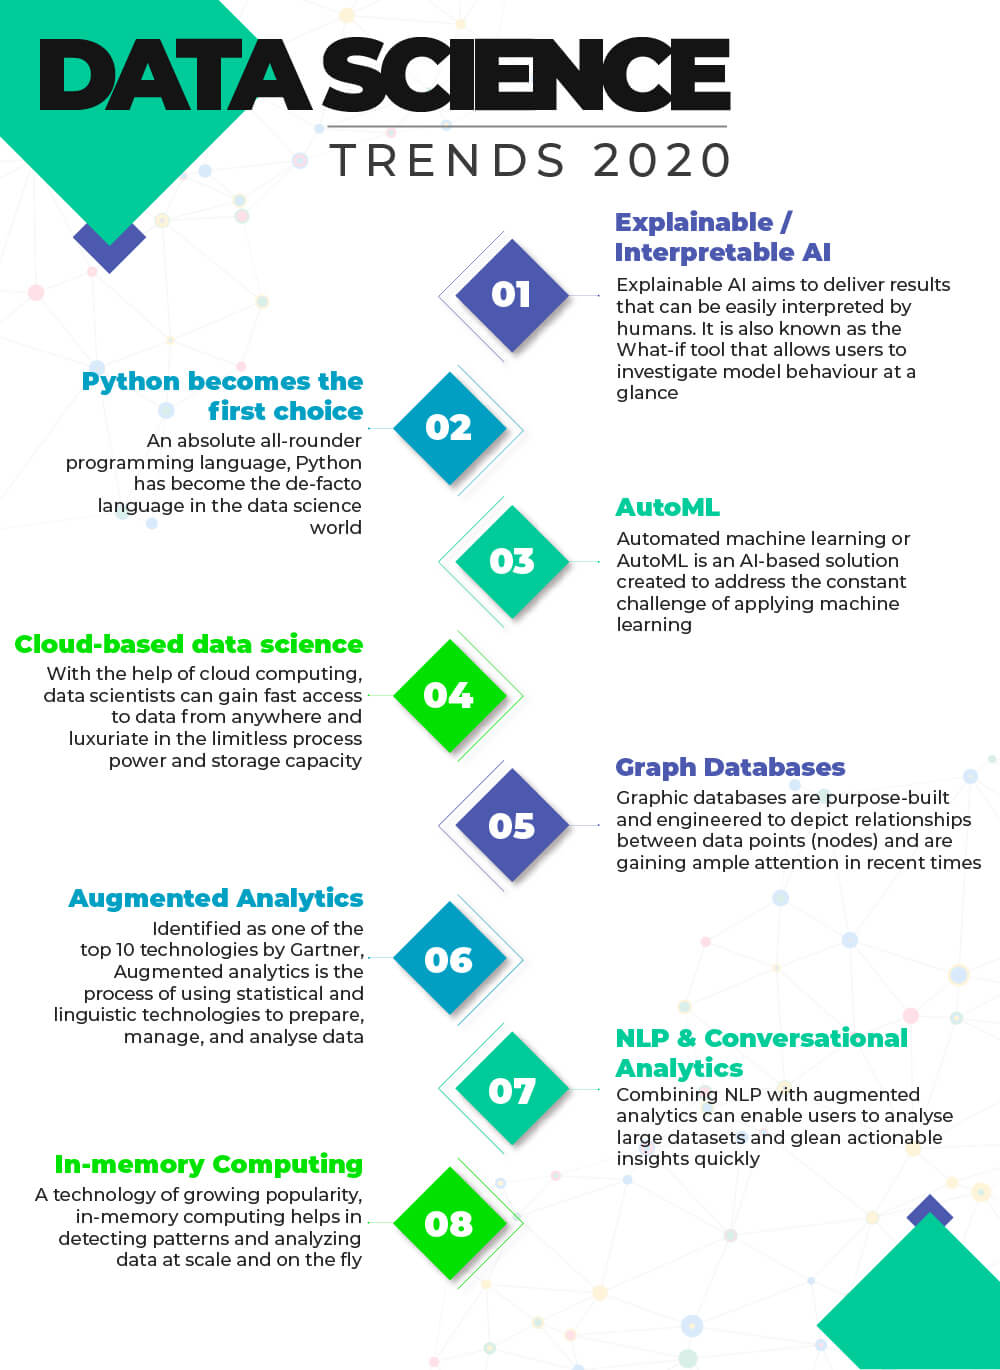 Data Science trends